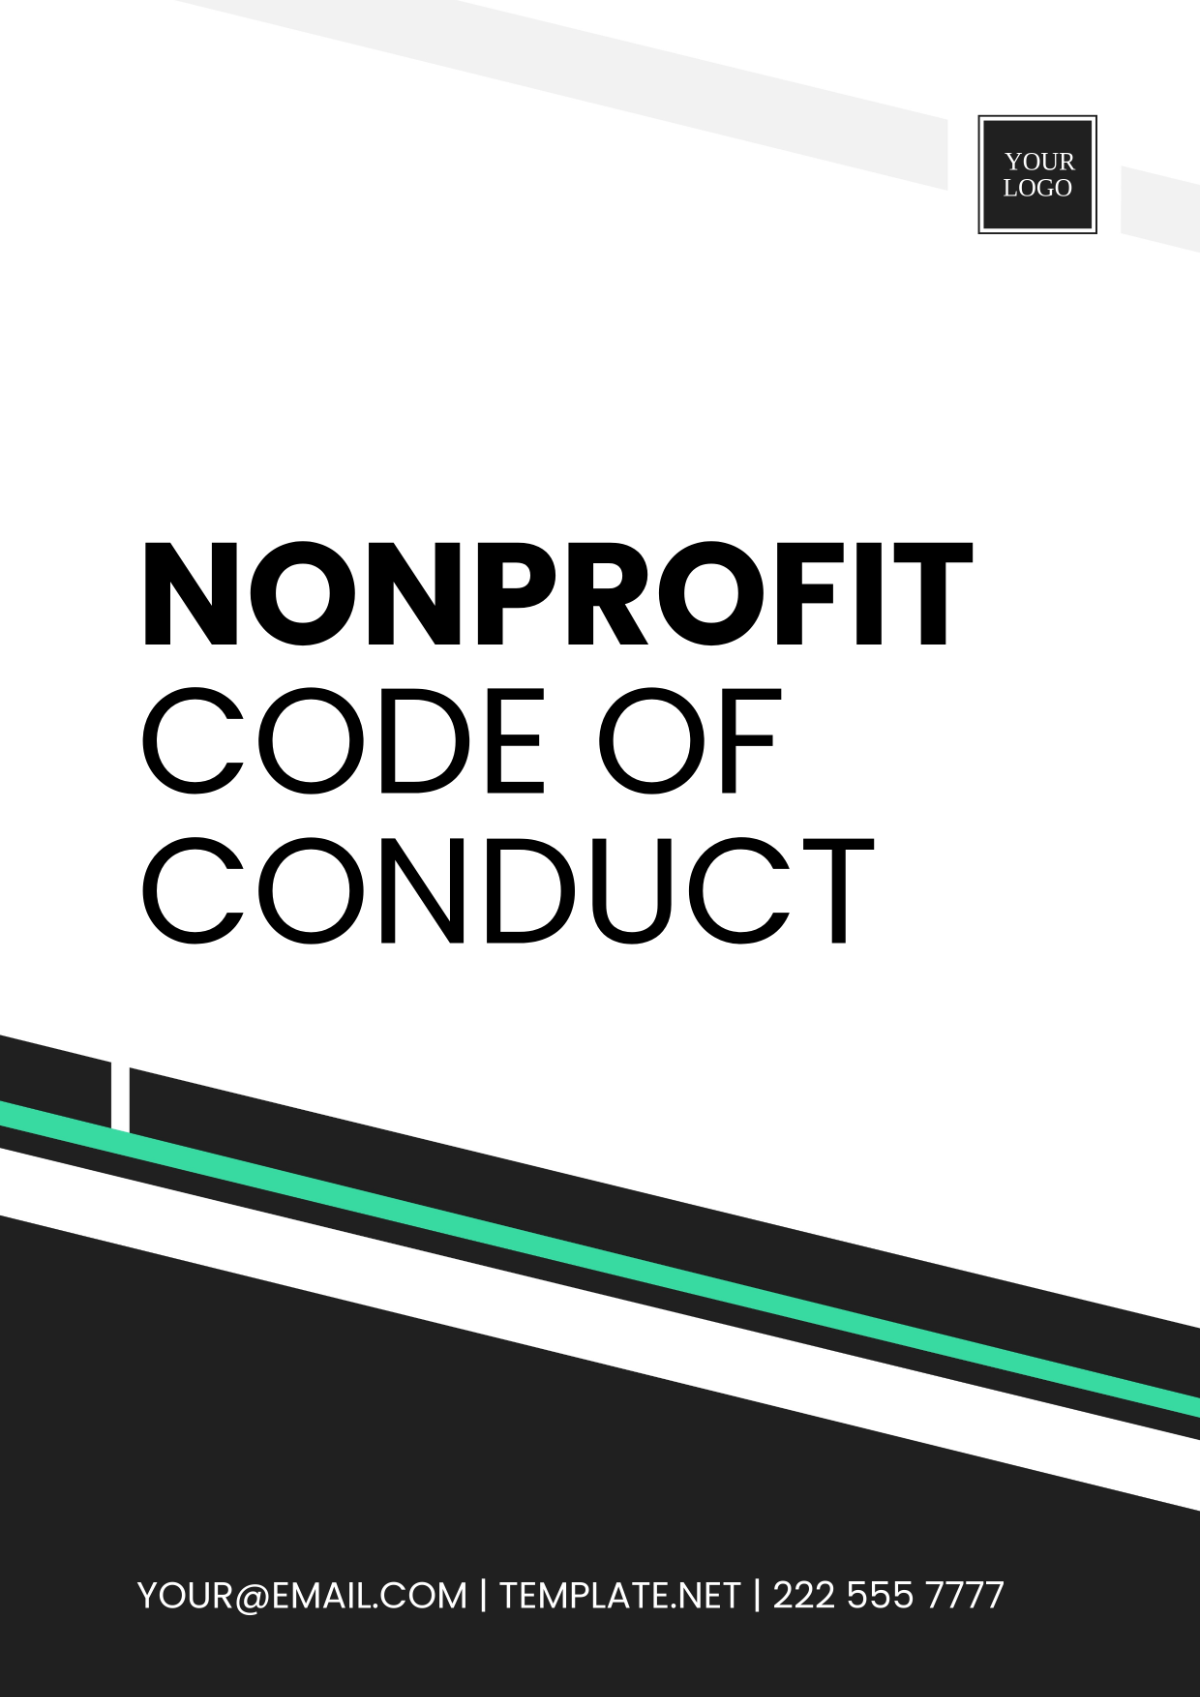 Nonprofit Code of Conduct Template